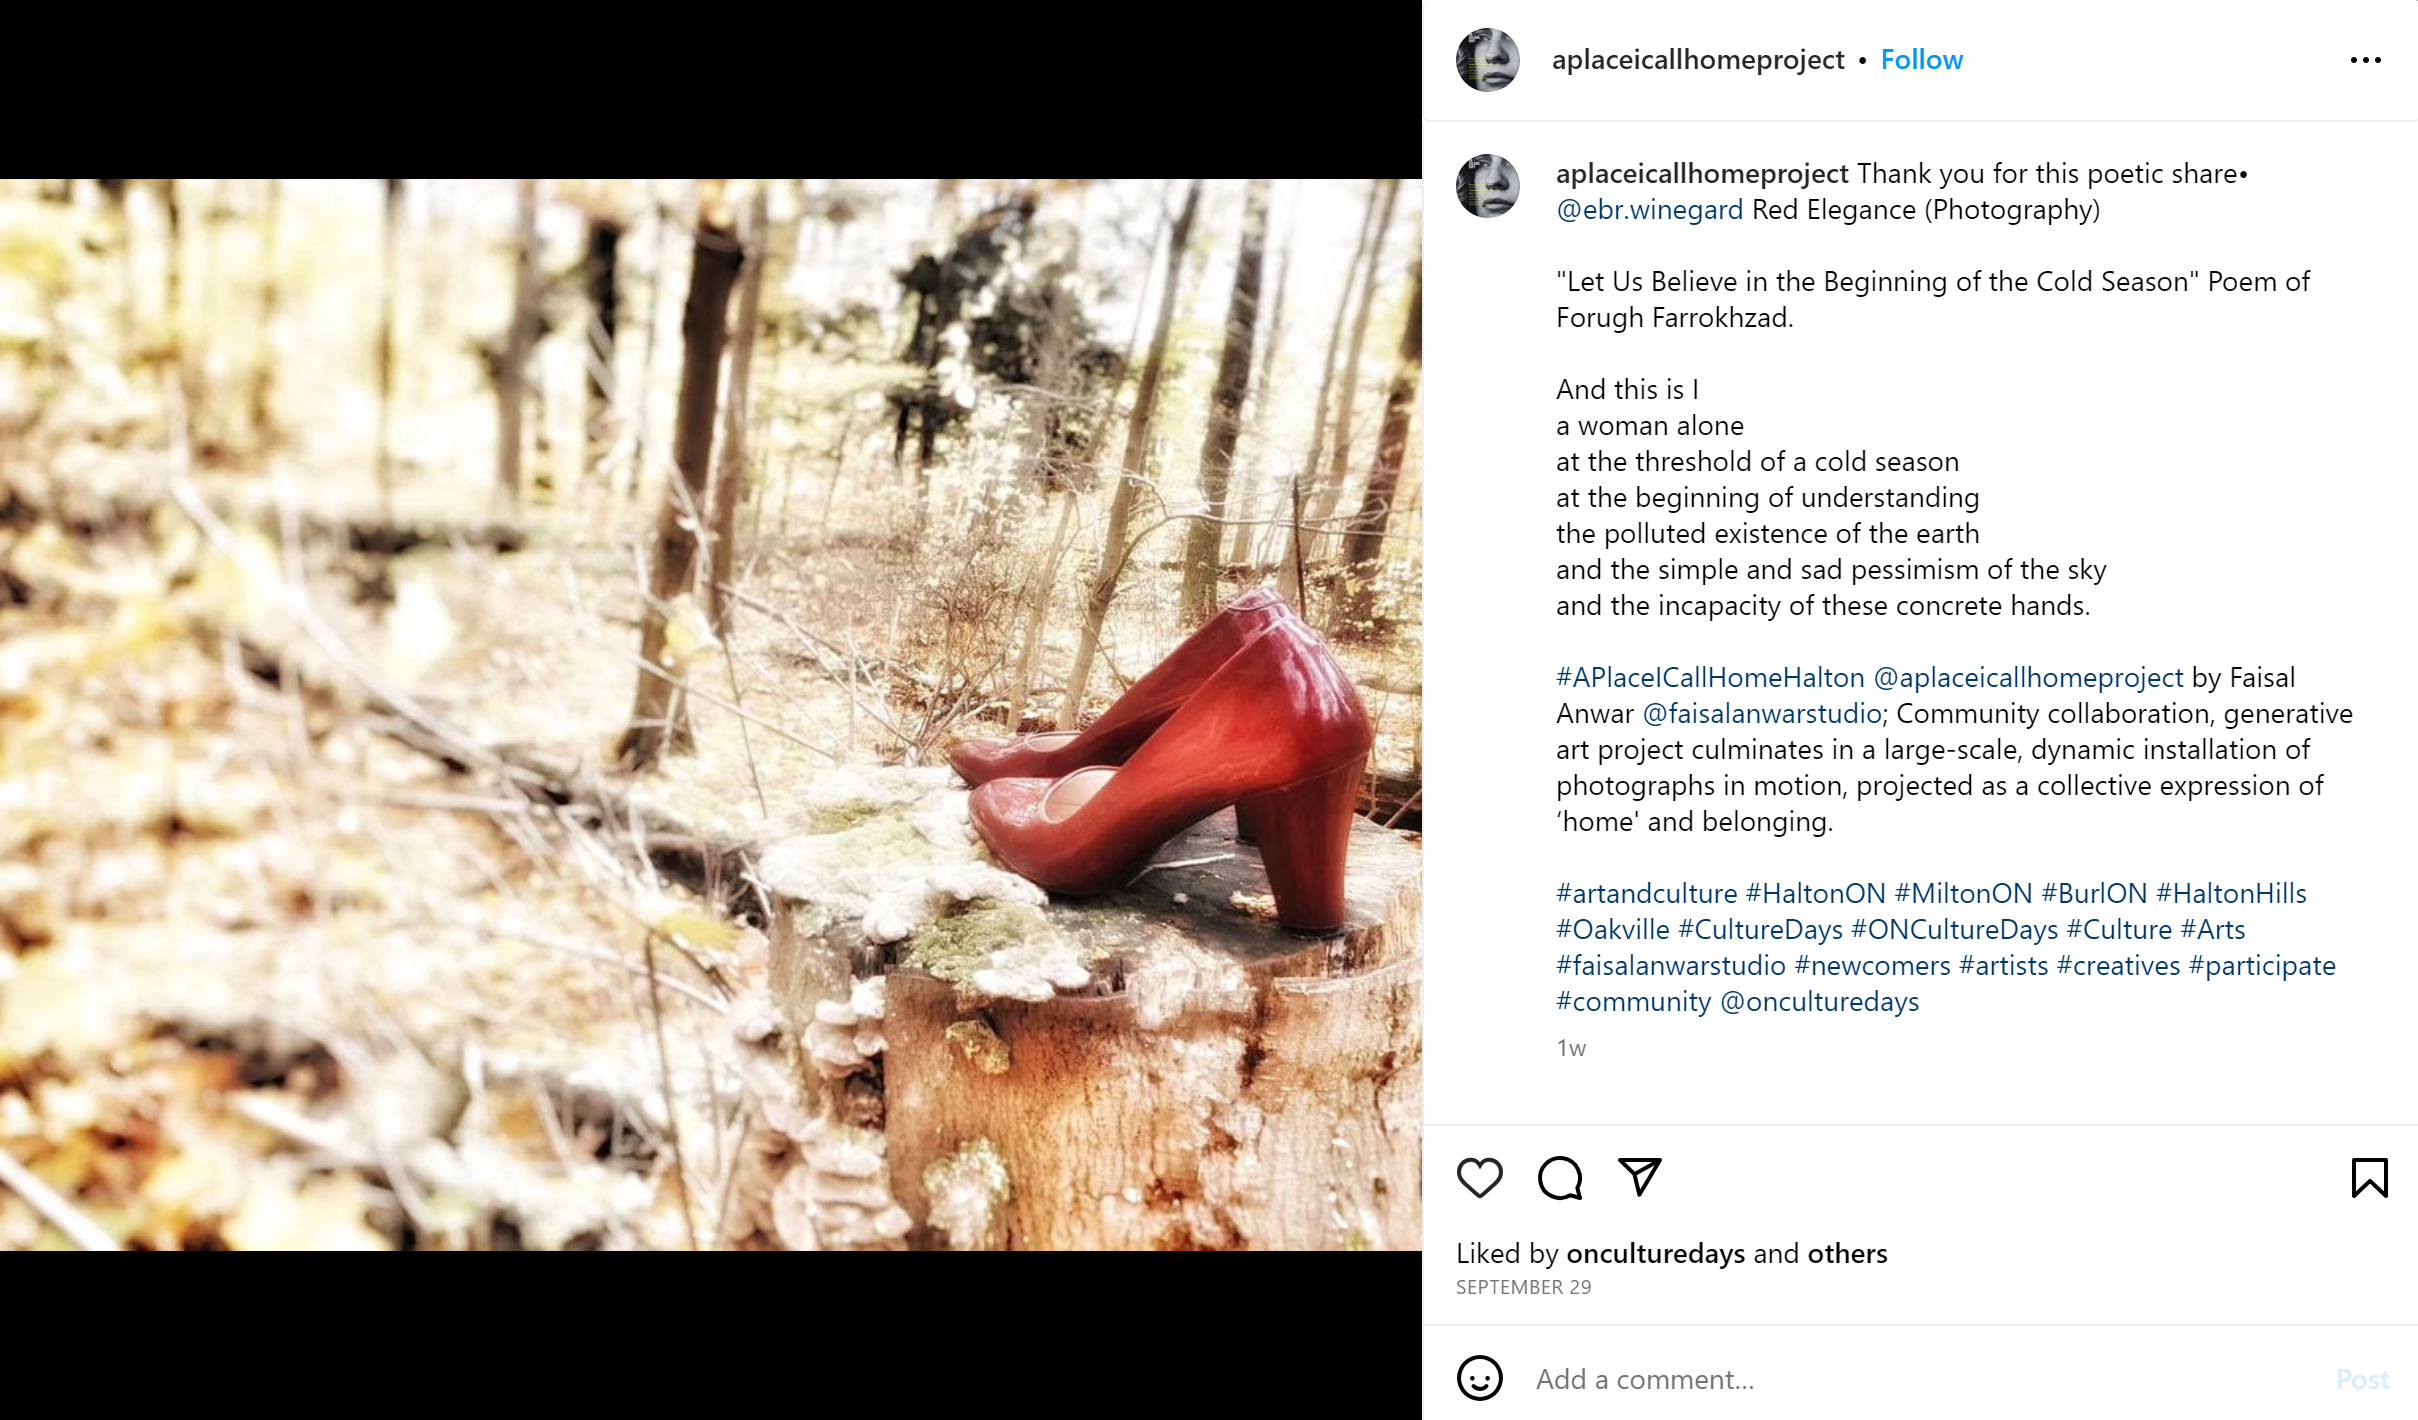 An image of a wooded area, with a pair of red high heels place on a tree stump in the right-hand edge of the photo. Beside the photo is a poem and hashtags; the image is from the Instagram account.